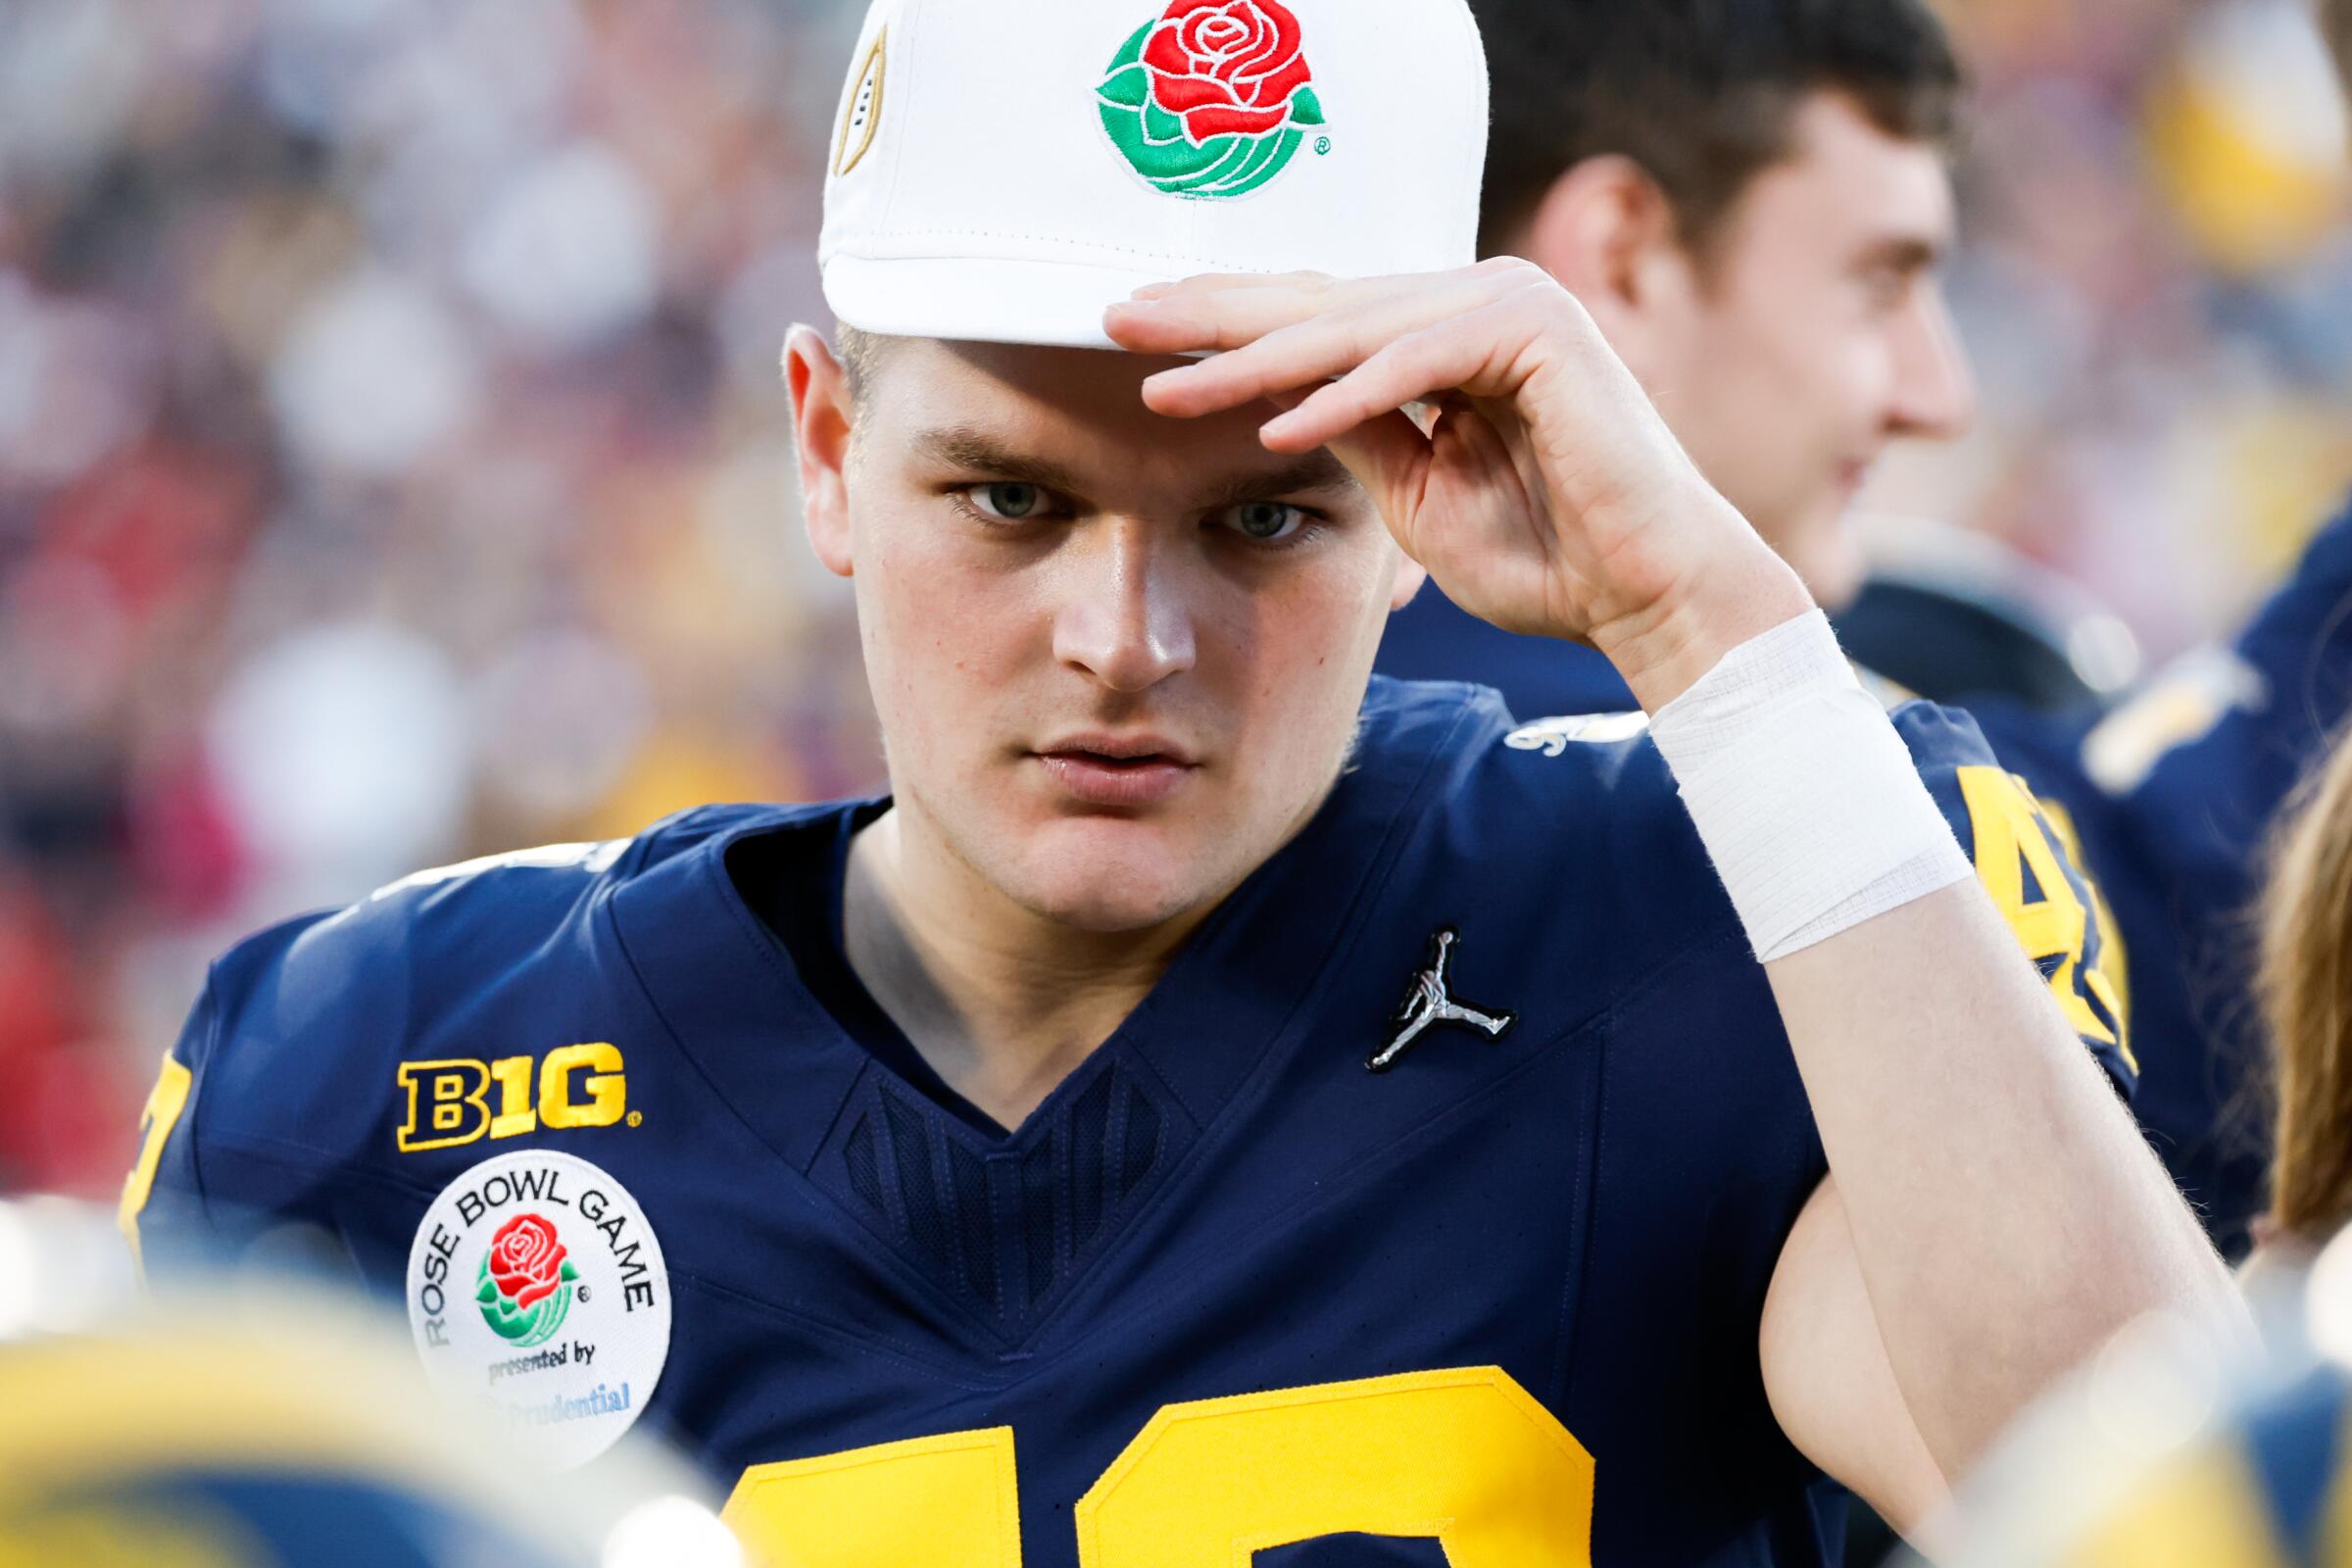 Michigan defensive back Jesse Madden stands on the sideline during the Rose Bowl against Alabama on Monday.